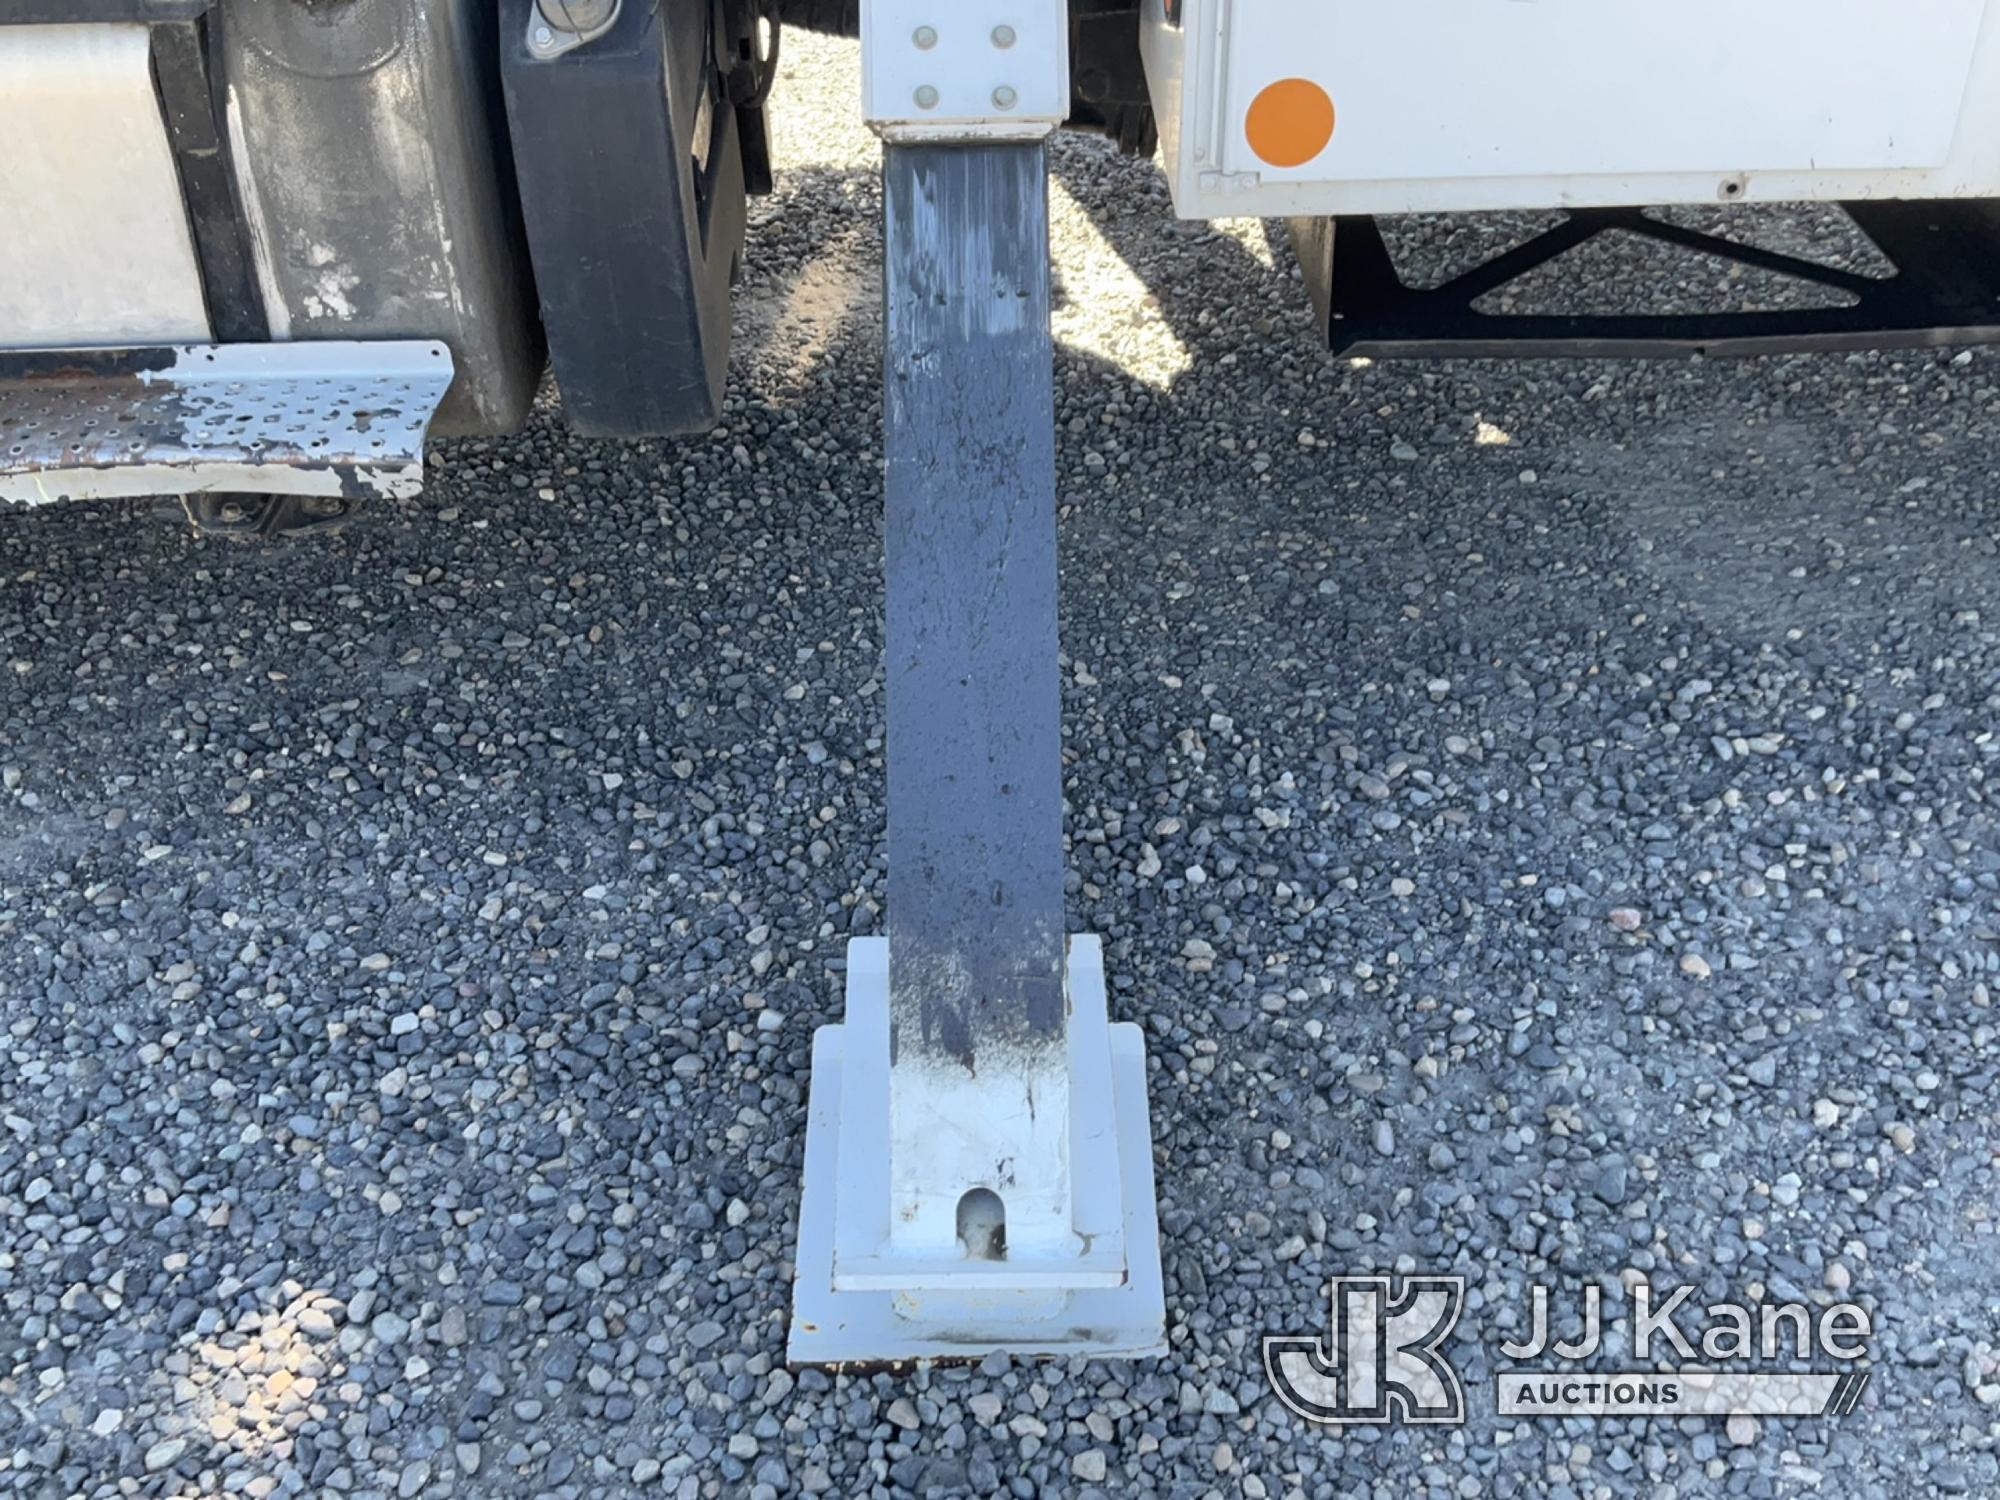 (Portland, OR) Altec AA55, Material Handling Bucket Truck rear mounted on 2015 Freightliner M2 106 4